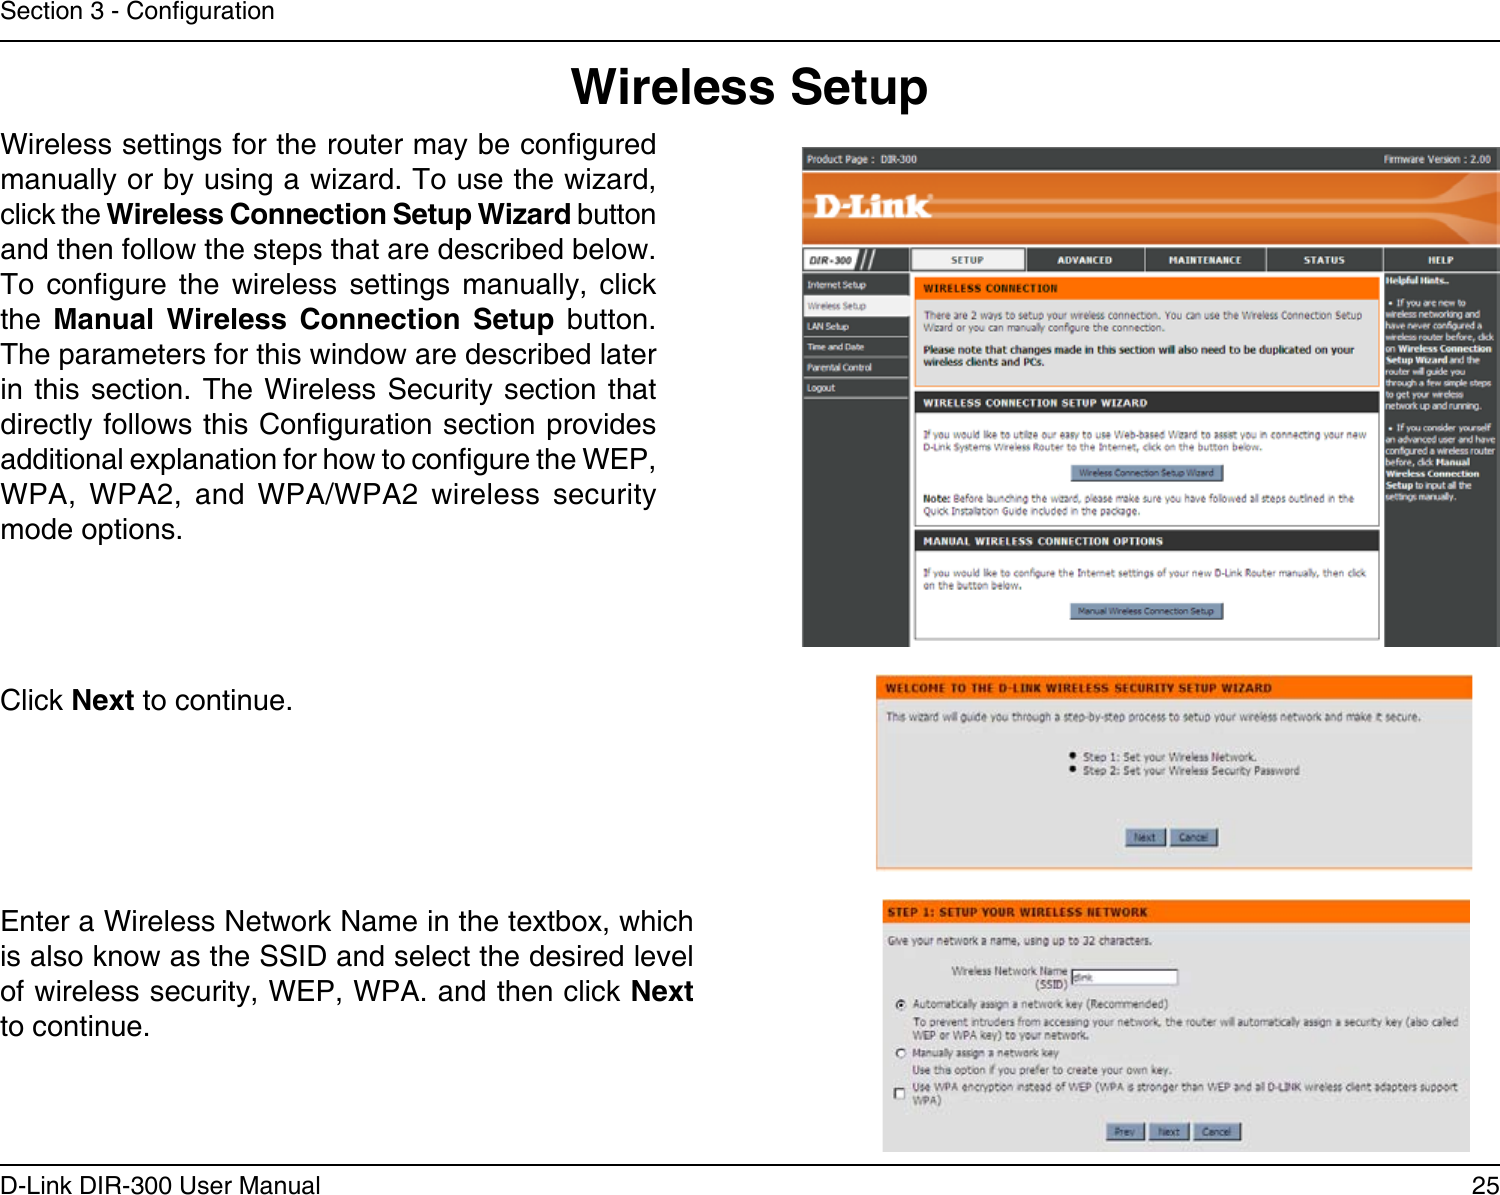 25D-Link DIR-300 User ManualSection 3 - CongurationWireless SetupWireless settings for the router may be congured manually or by using a wizard. To use the wizard, click the Wireless Connection Setup Wizard button and then follow the steps that are described below. To  congure  the  wireless  settings  manually,  click the  Manual  Wireless  Connection Setup  button. The parameters for this window are described later in this  section. The Wireless  Security section that directly follows this Conguration section provides  additional explanation for how to congure the WEP, WPA,  WPA2,  and  WPA/WPA2  wireless  security mode options. Click Next to continue.Enter a Wireless Network Name in the textbox, which is also know as the SSID and select the desired level of wireless security, WEP, WPA. and then click Next to continue.